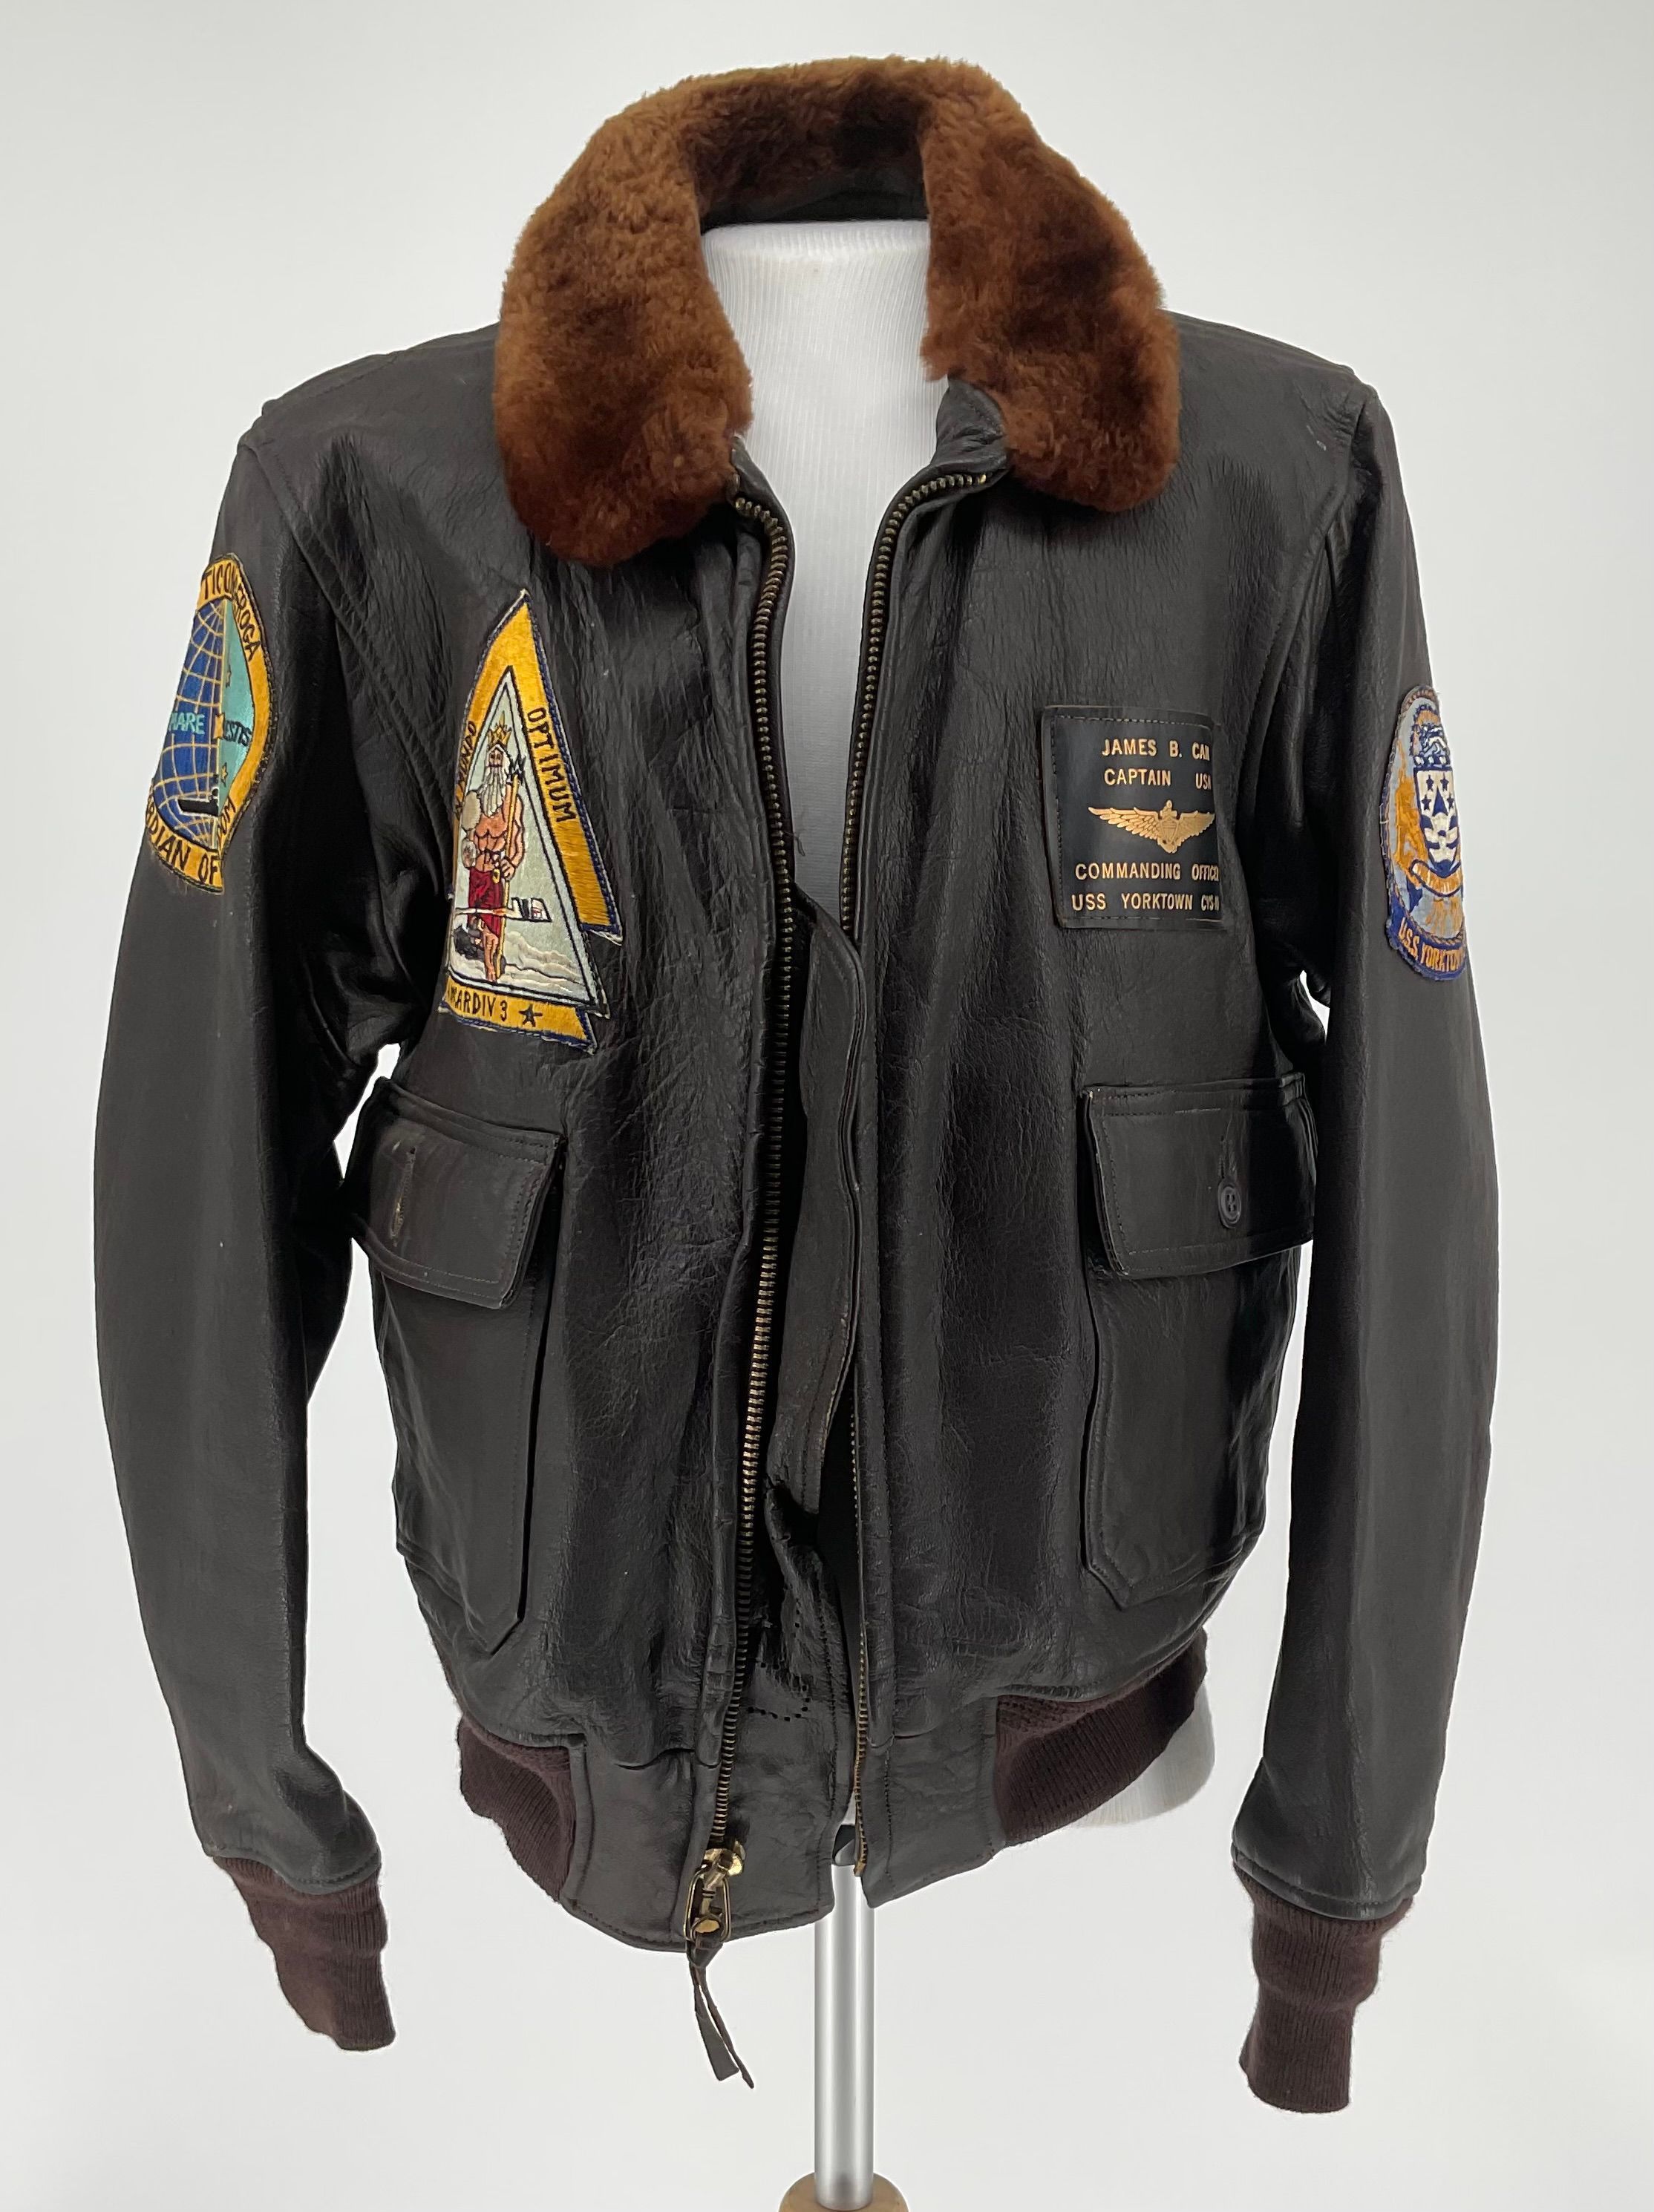 Primary Image of Leather Flight Jacket of James Cain